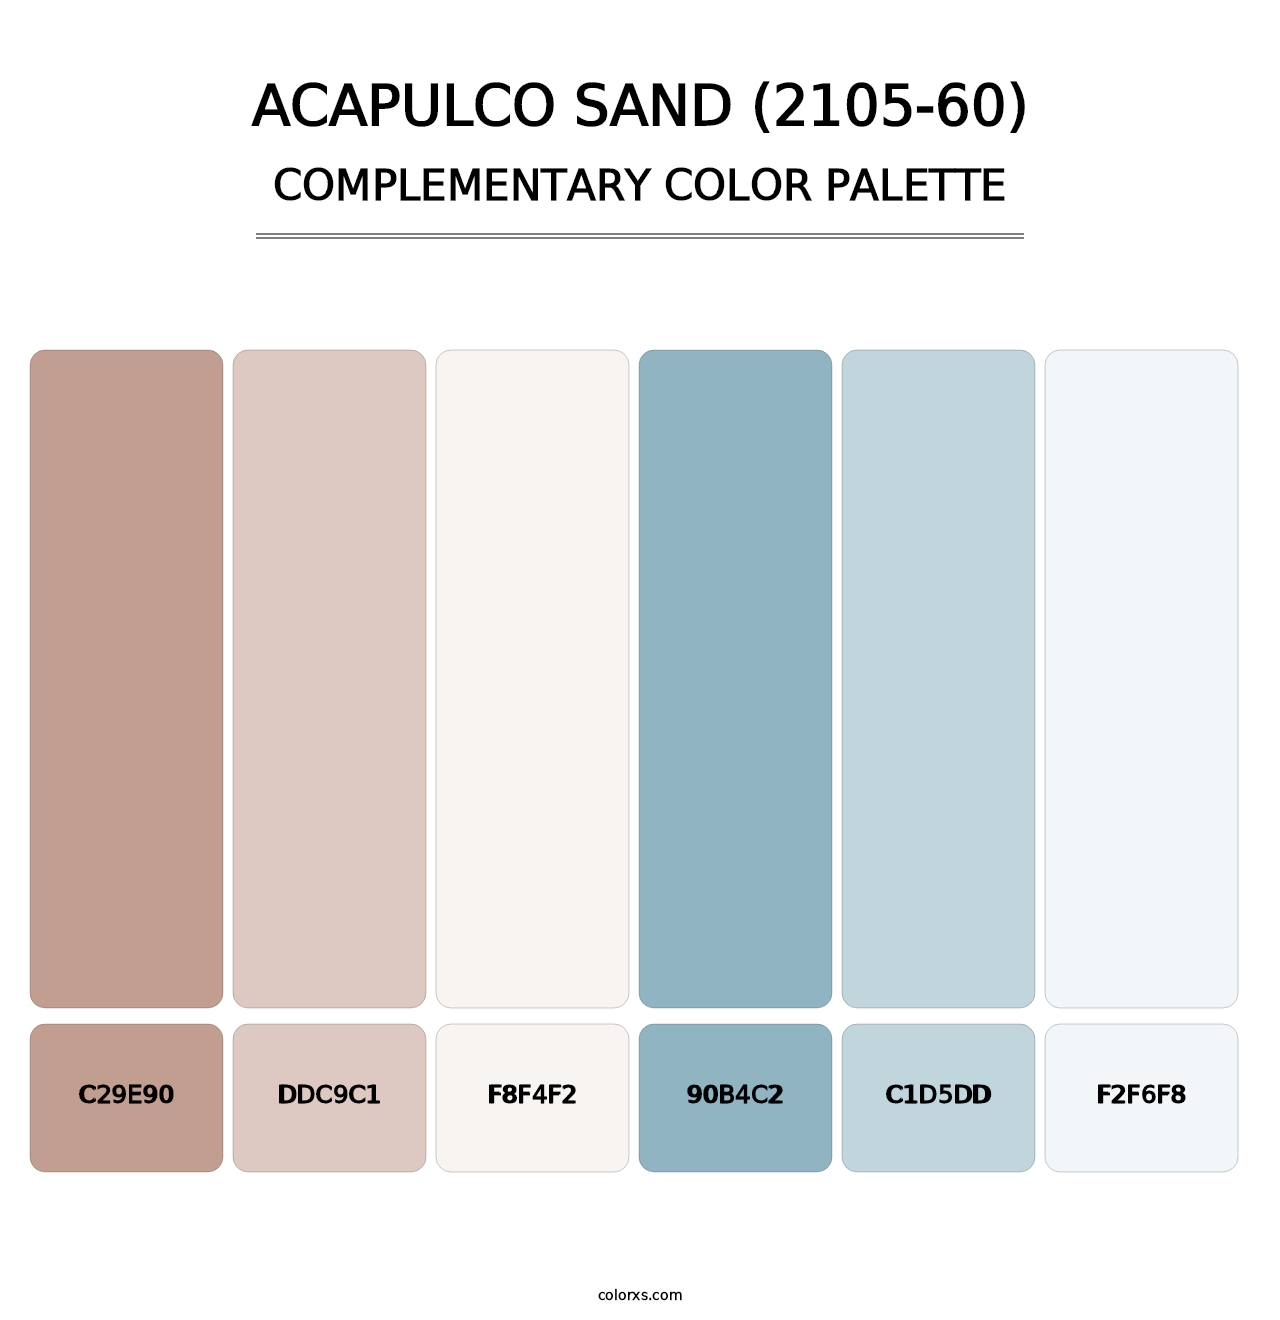 Acapulco Sand (2105-60) - Complementary Color Palette